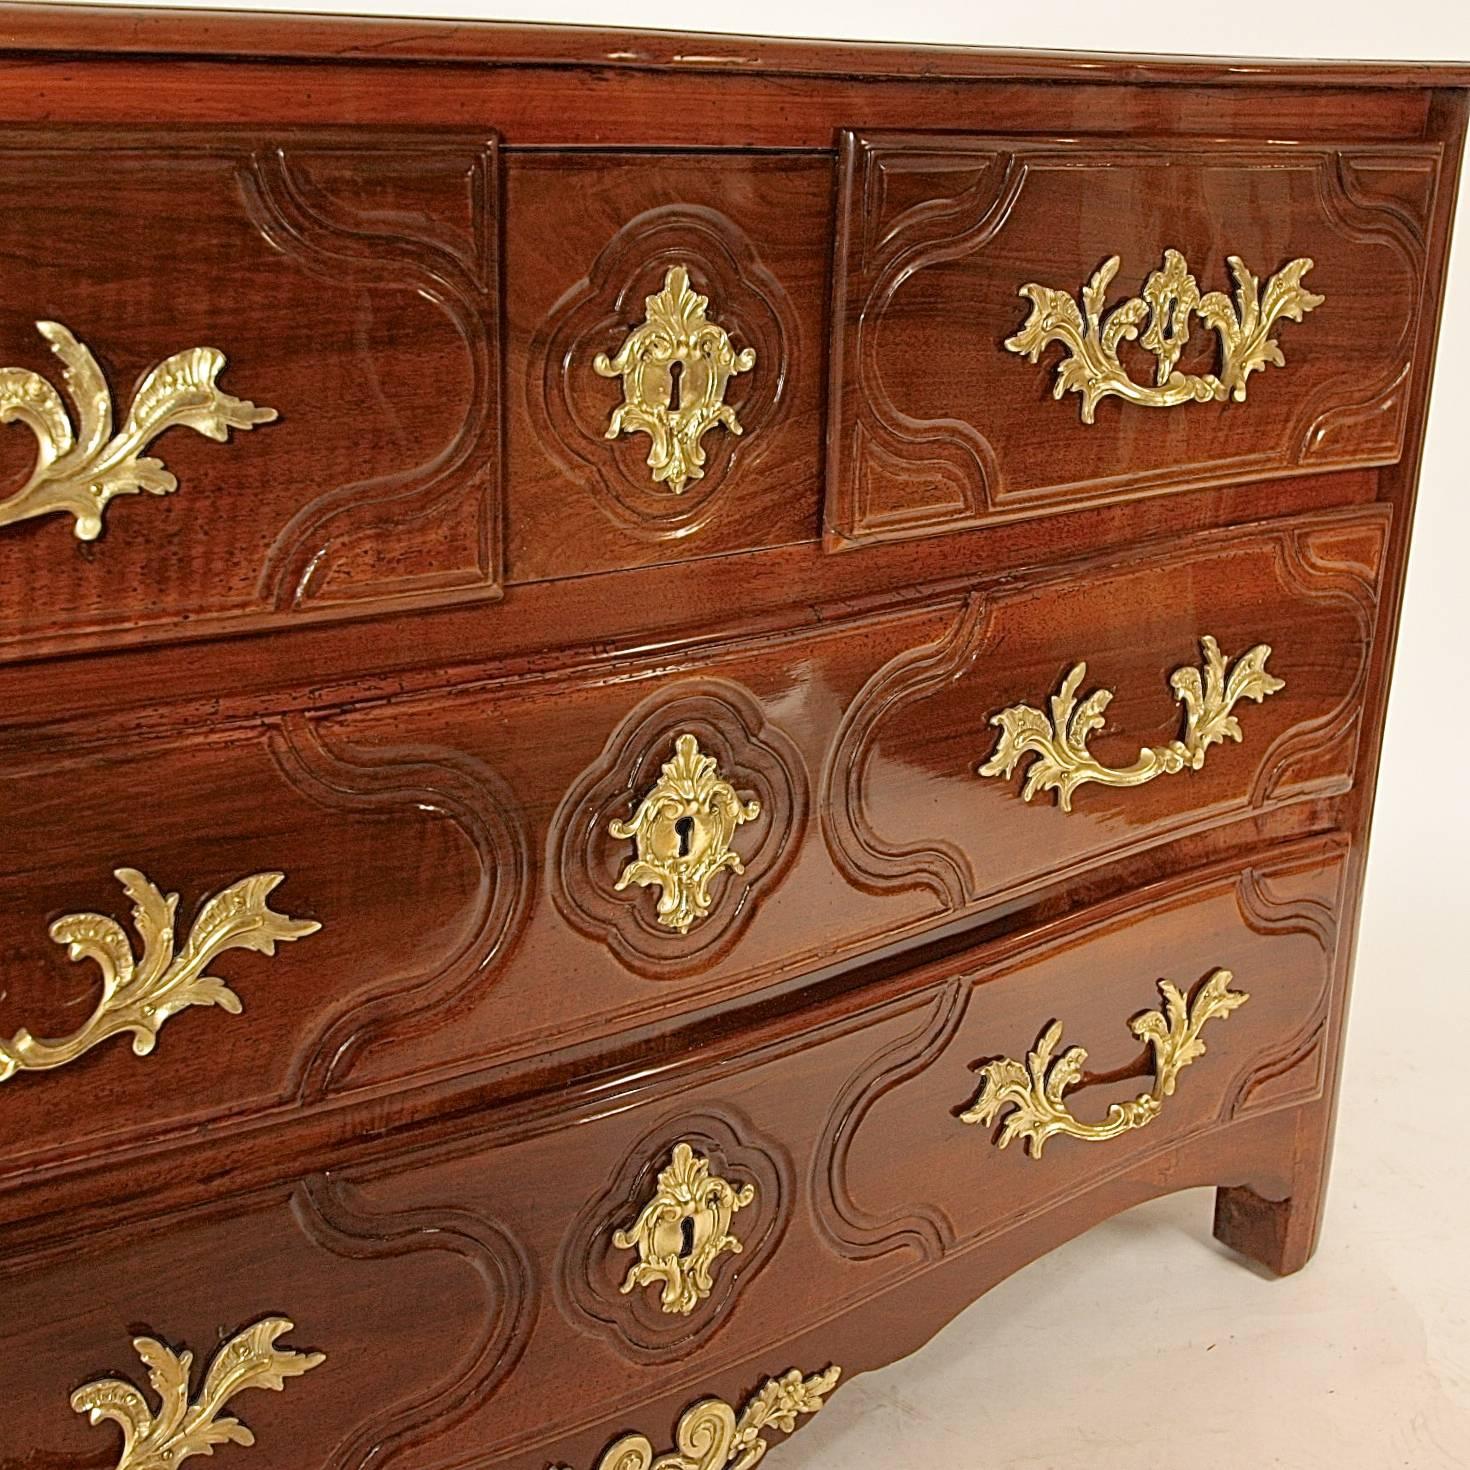 Early 18th Century French Regence Walnut Gilt Bronze Commode In Excellent Condition For Sale In Berlin, DE